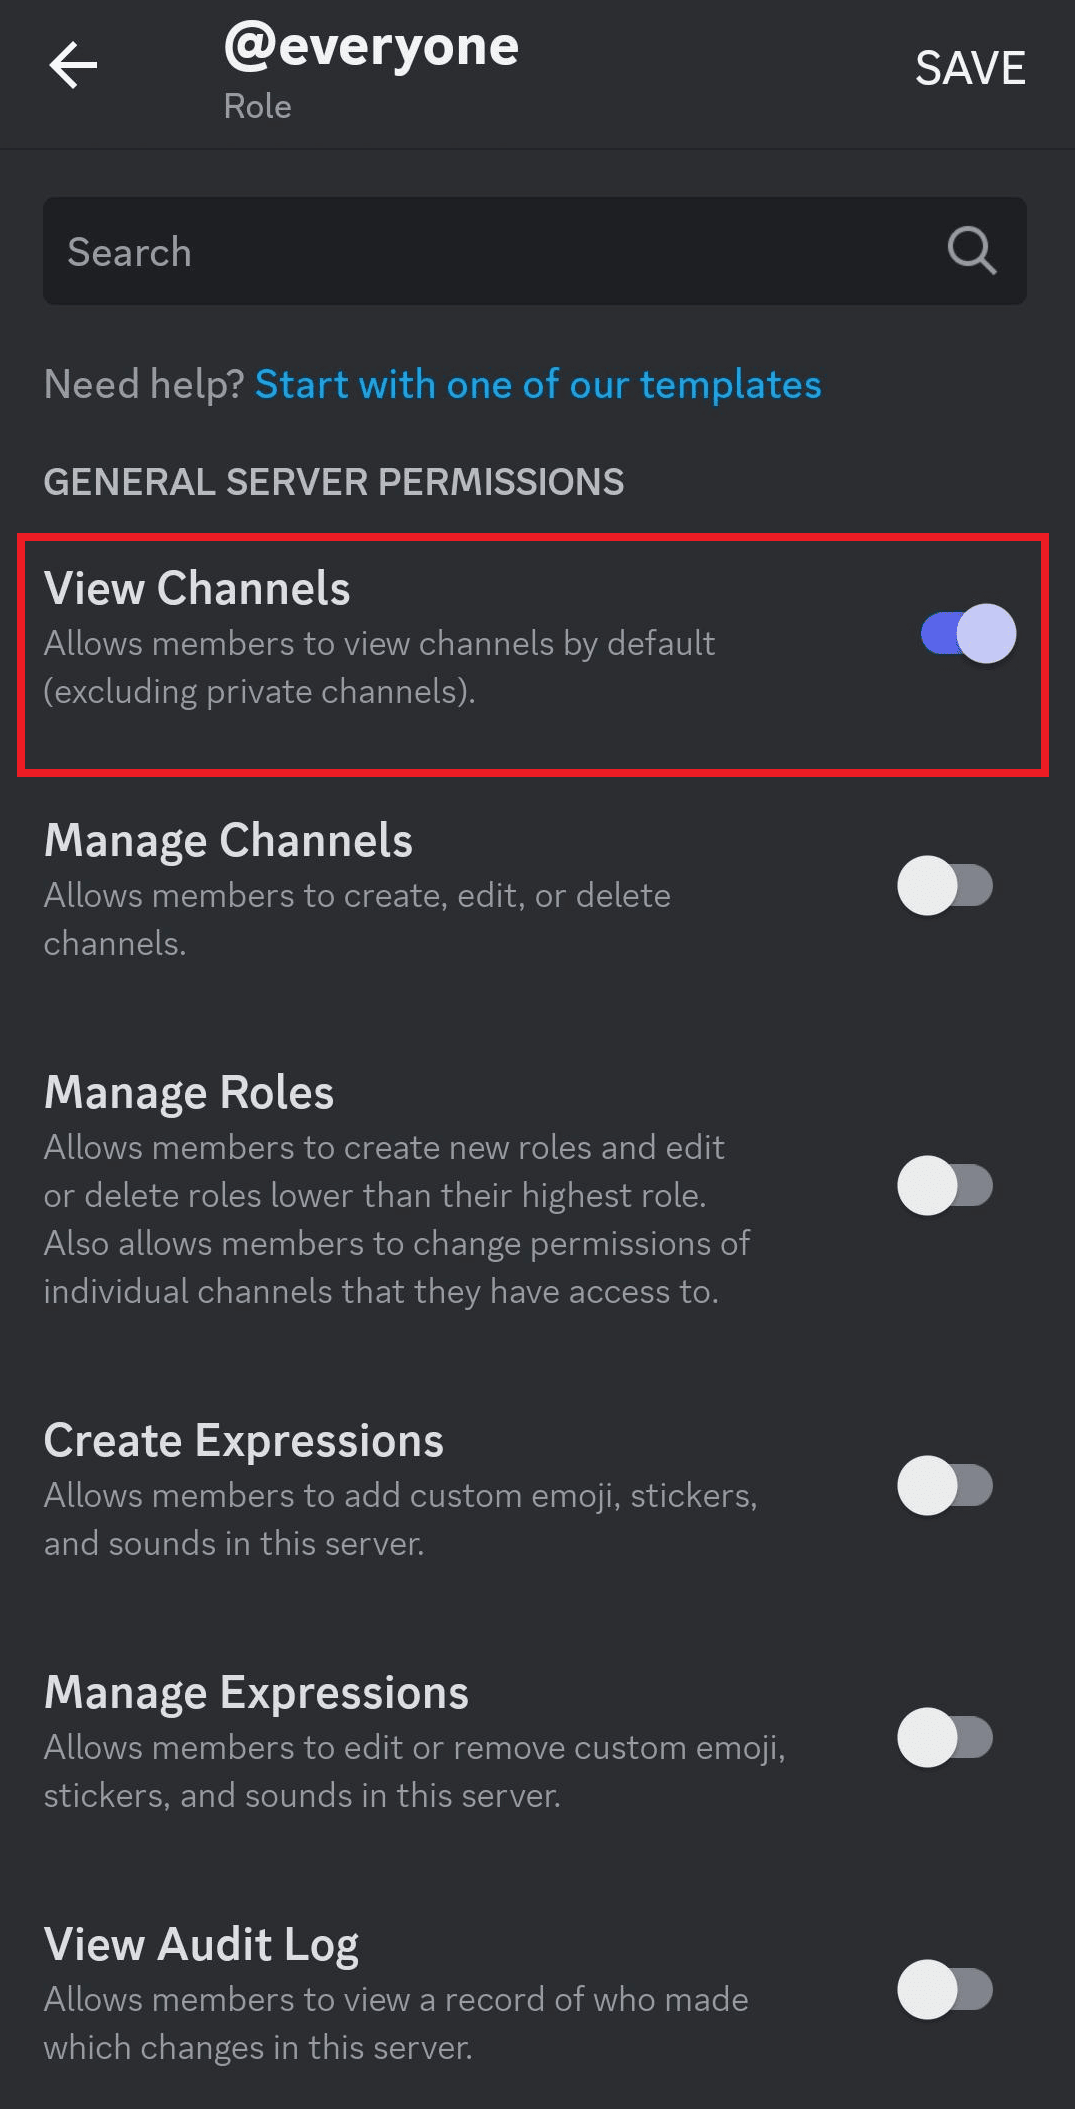   Turn off all permissions except View Channels.